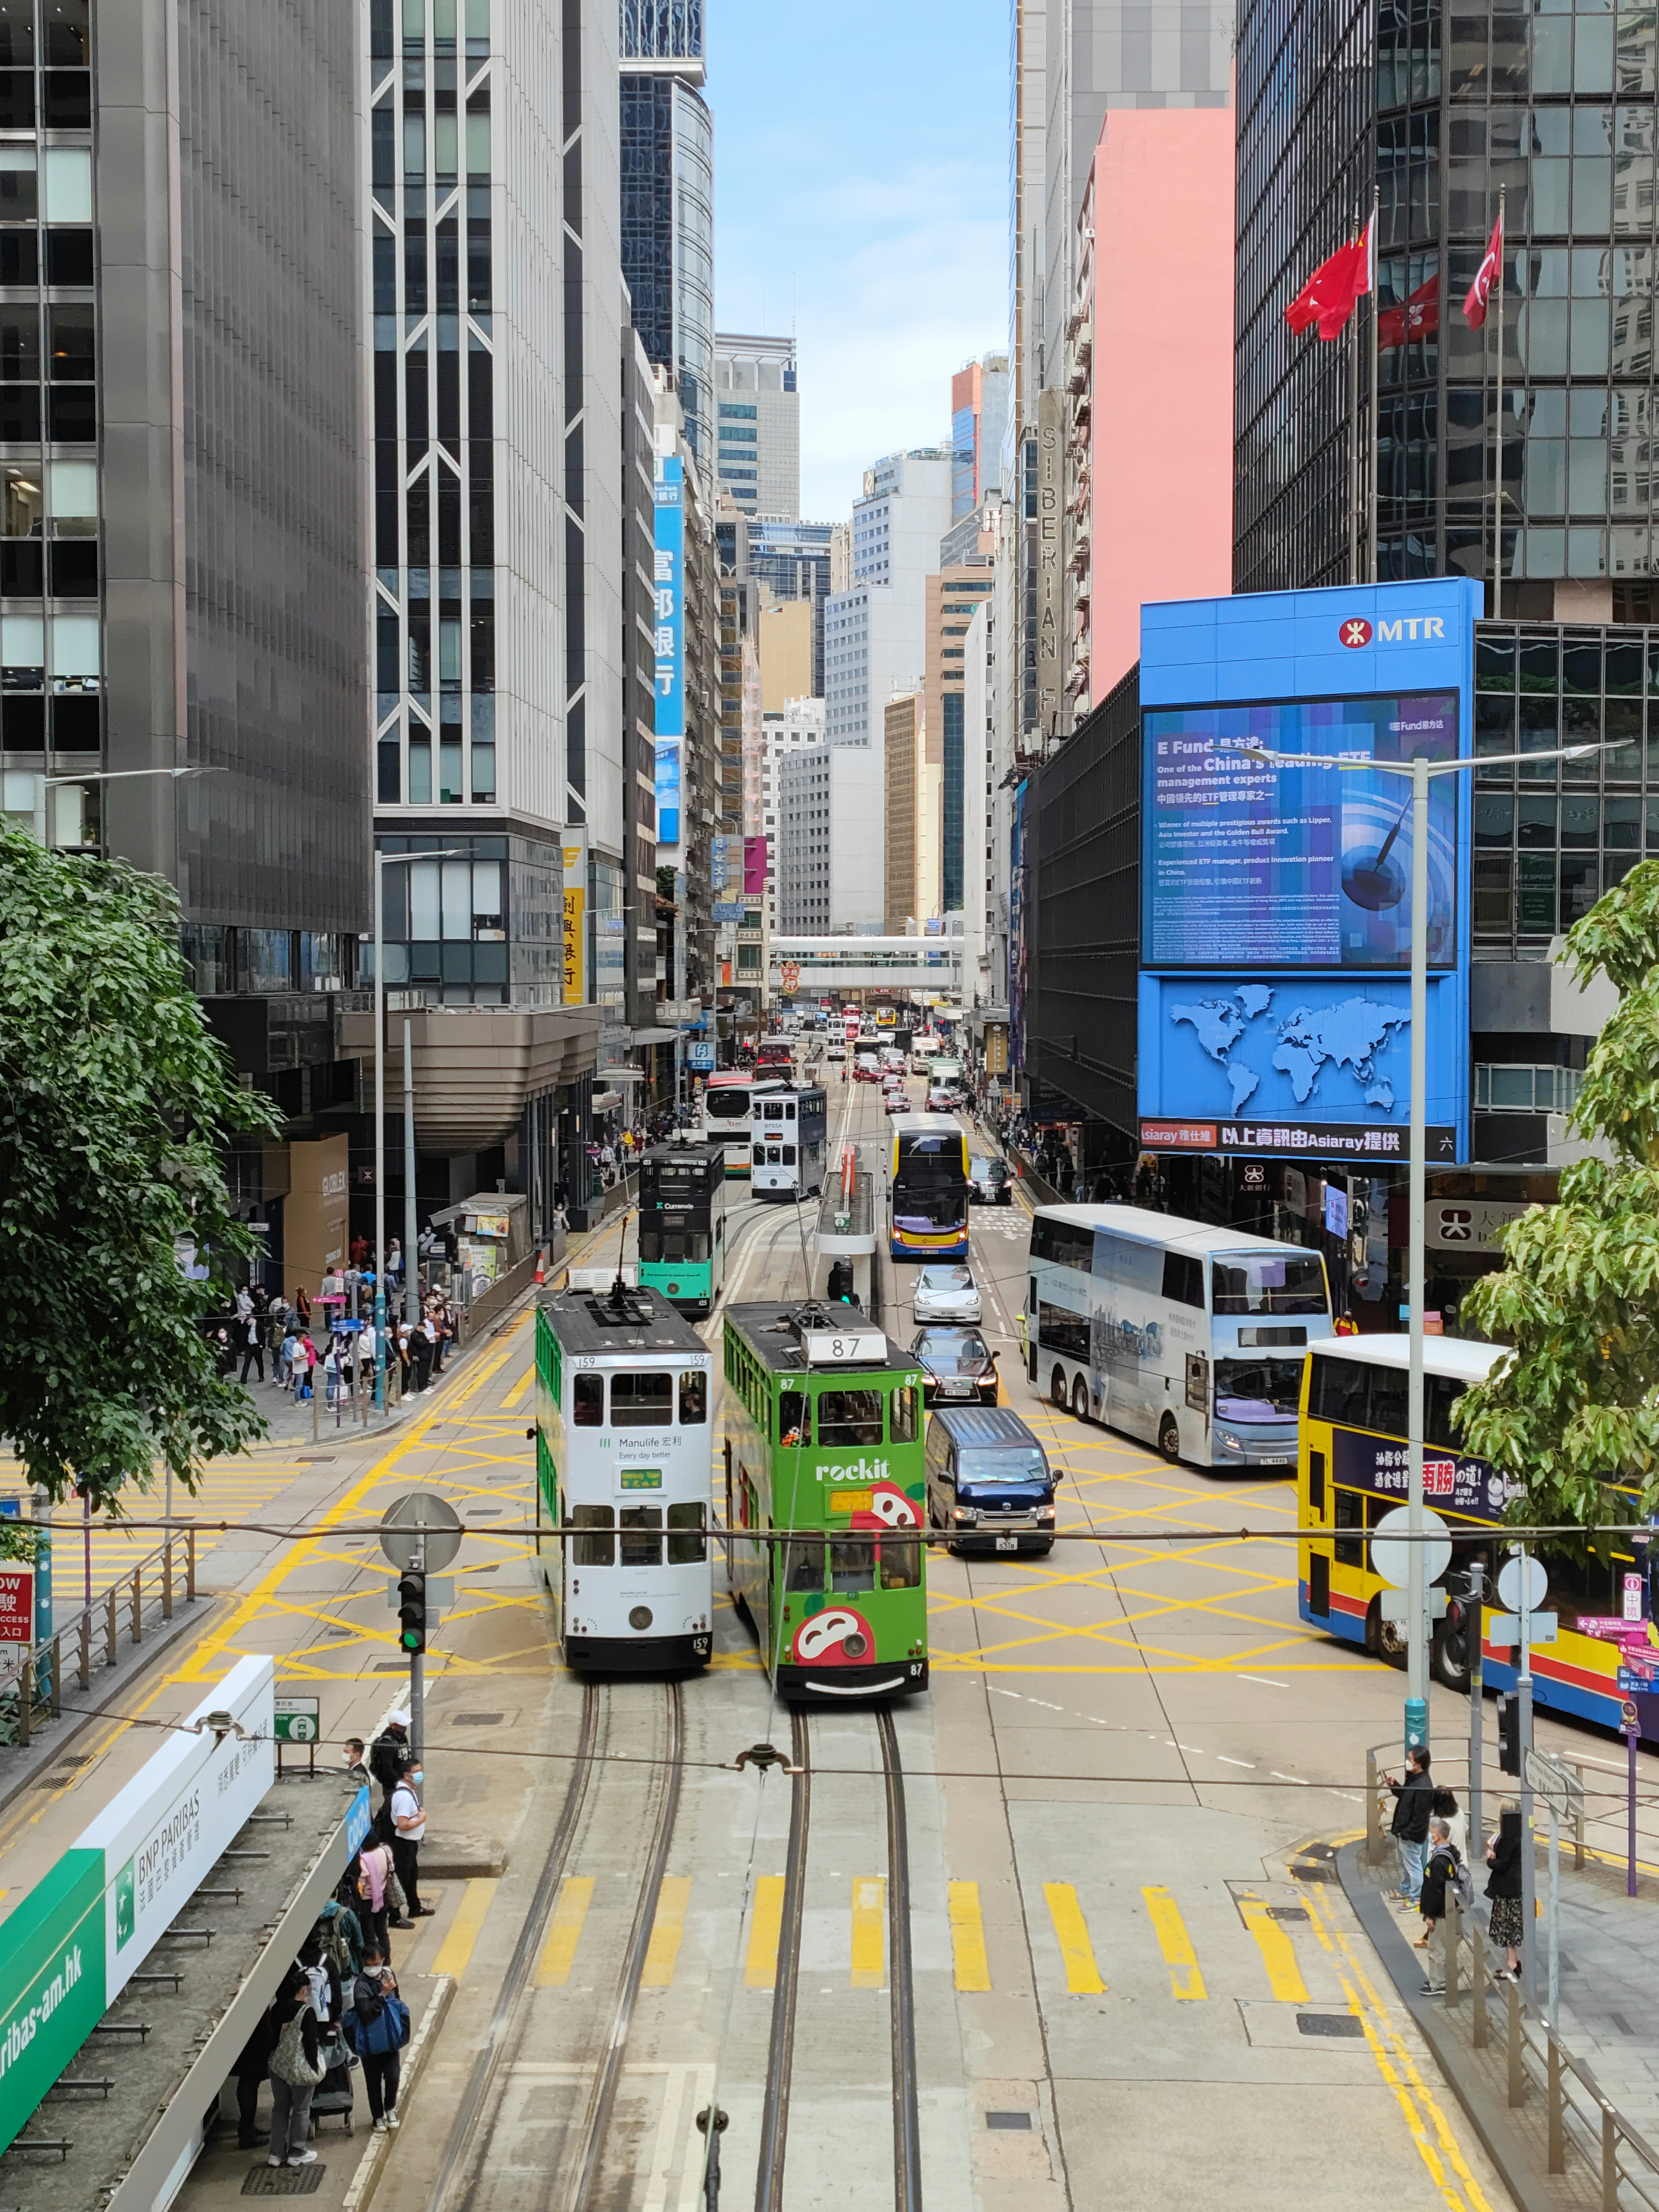 Busy city street traffic on an office day. Hustle and bustle, with trams near a road junction outside On the left is the shopping mall called Landmark in Des Voeux Road Central, Central District, the CBD on Hong Kong Island.
The tram company is called Hong Kong Tramways. This is the largest double decker tram fleet in service in the world.
There are two trams running on opposite lanes. Dex Voeux Road is also nicknamed 'tram road' (電車路）.